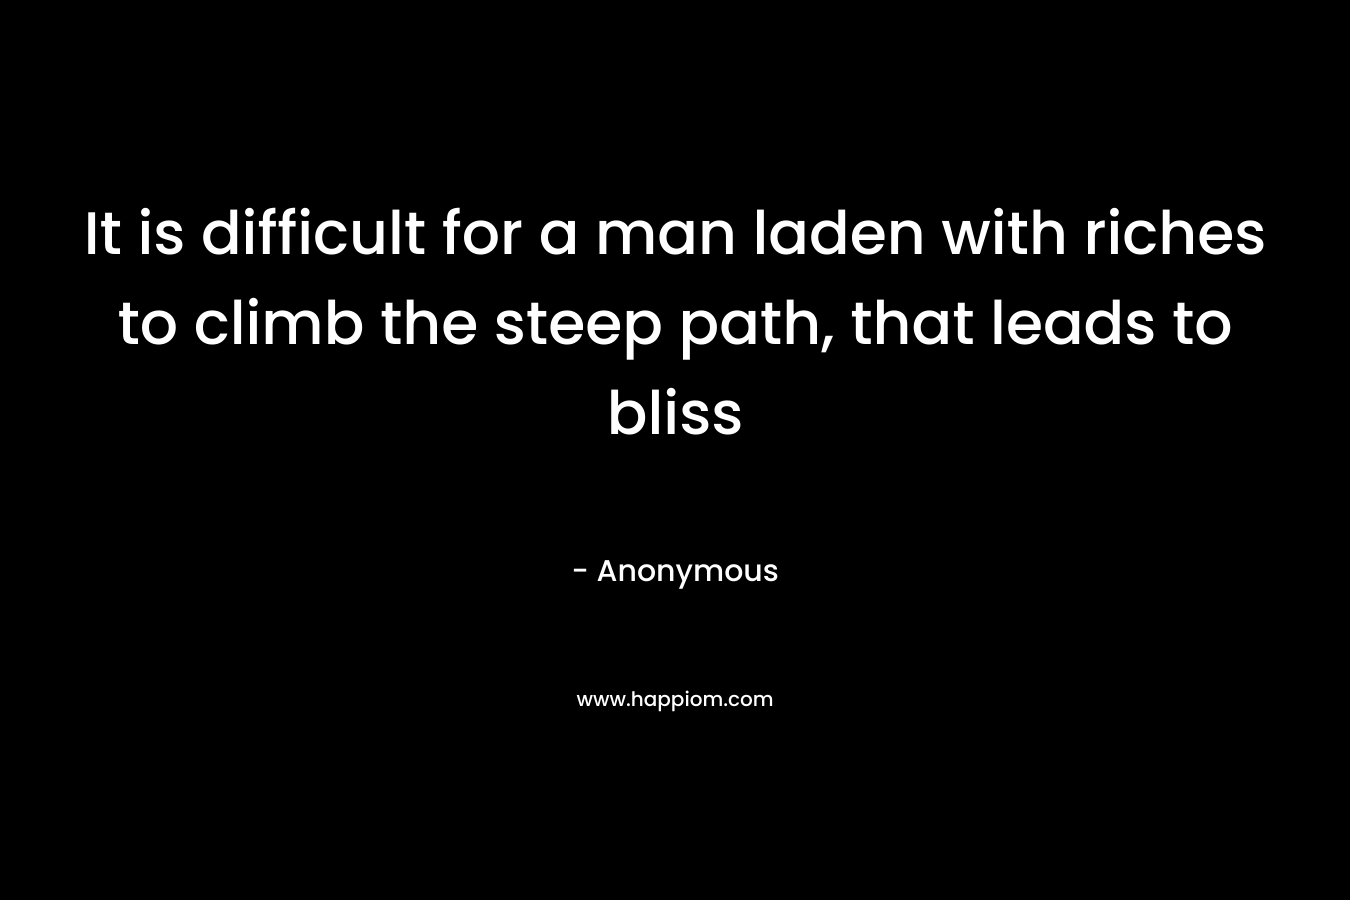 It is difficult for a man laden with riches to climb the steep path, that leads to bliss – Anonymous